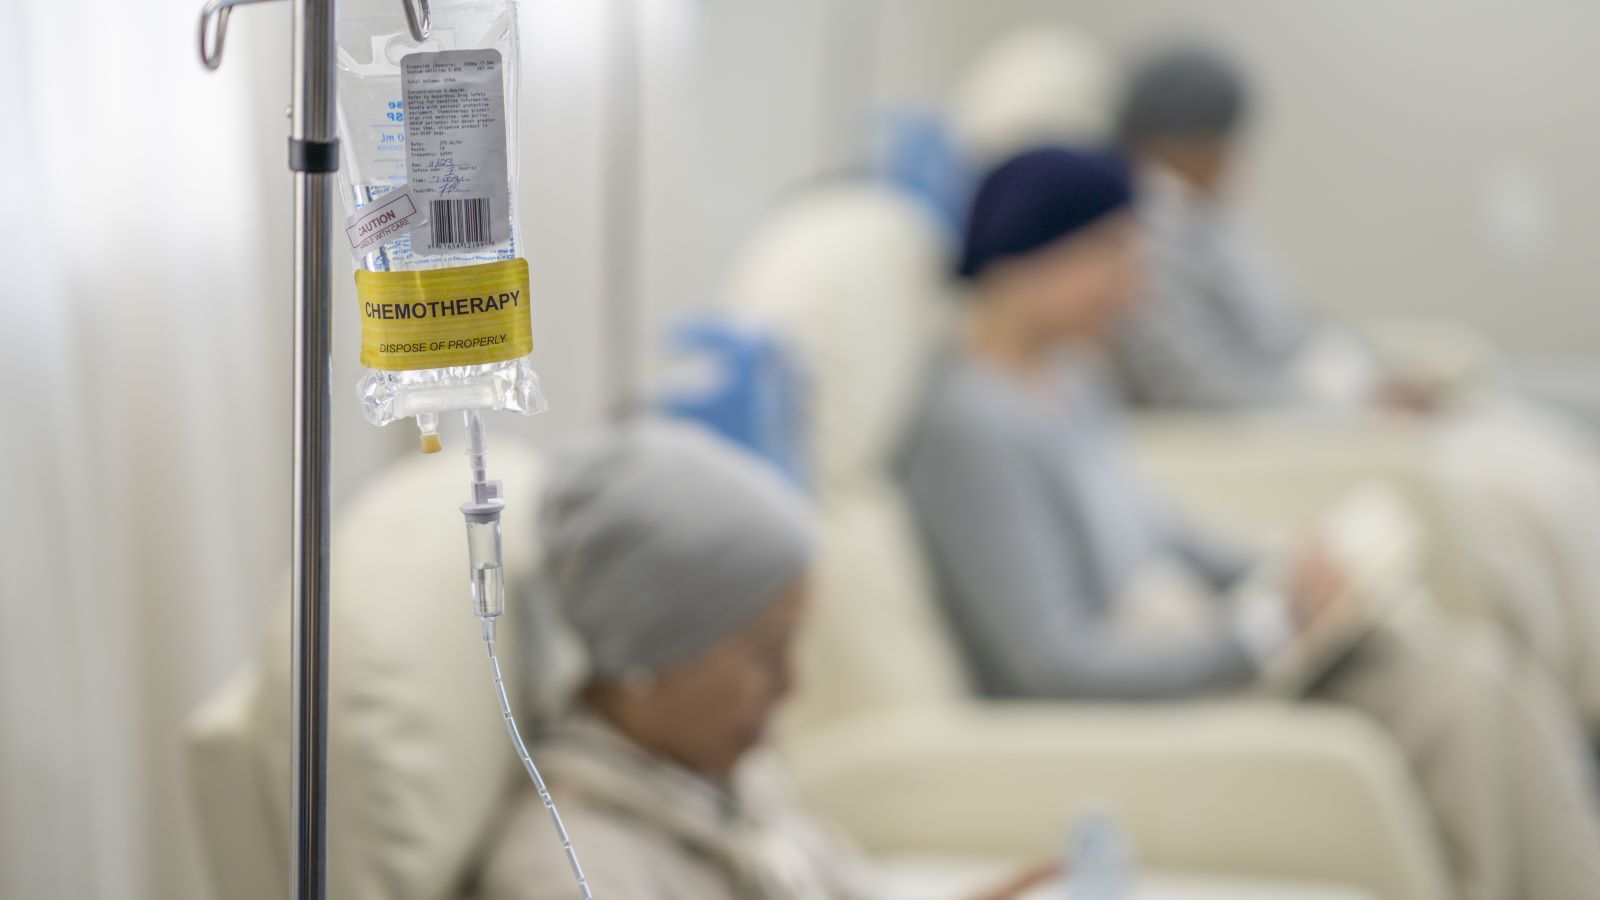 Wondering how to prepare for chemotherapy, or handle the side effects afterwards? Here's what an expert has to say.